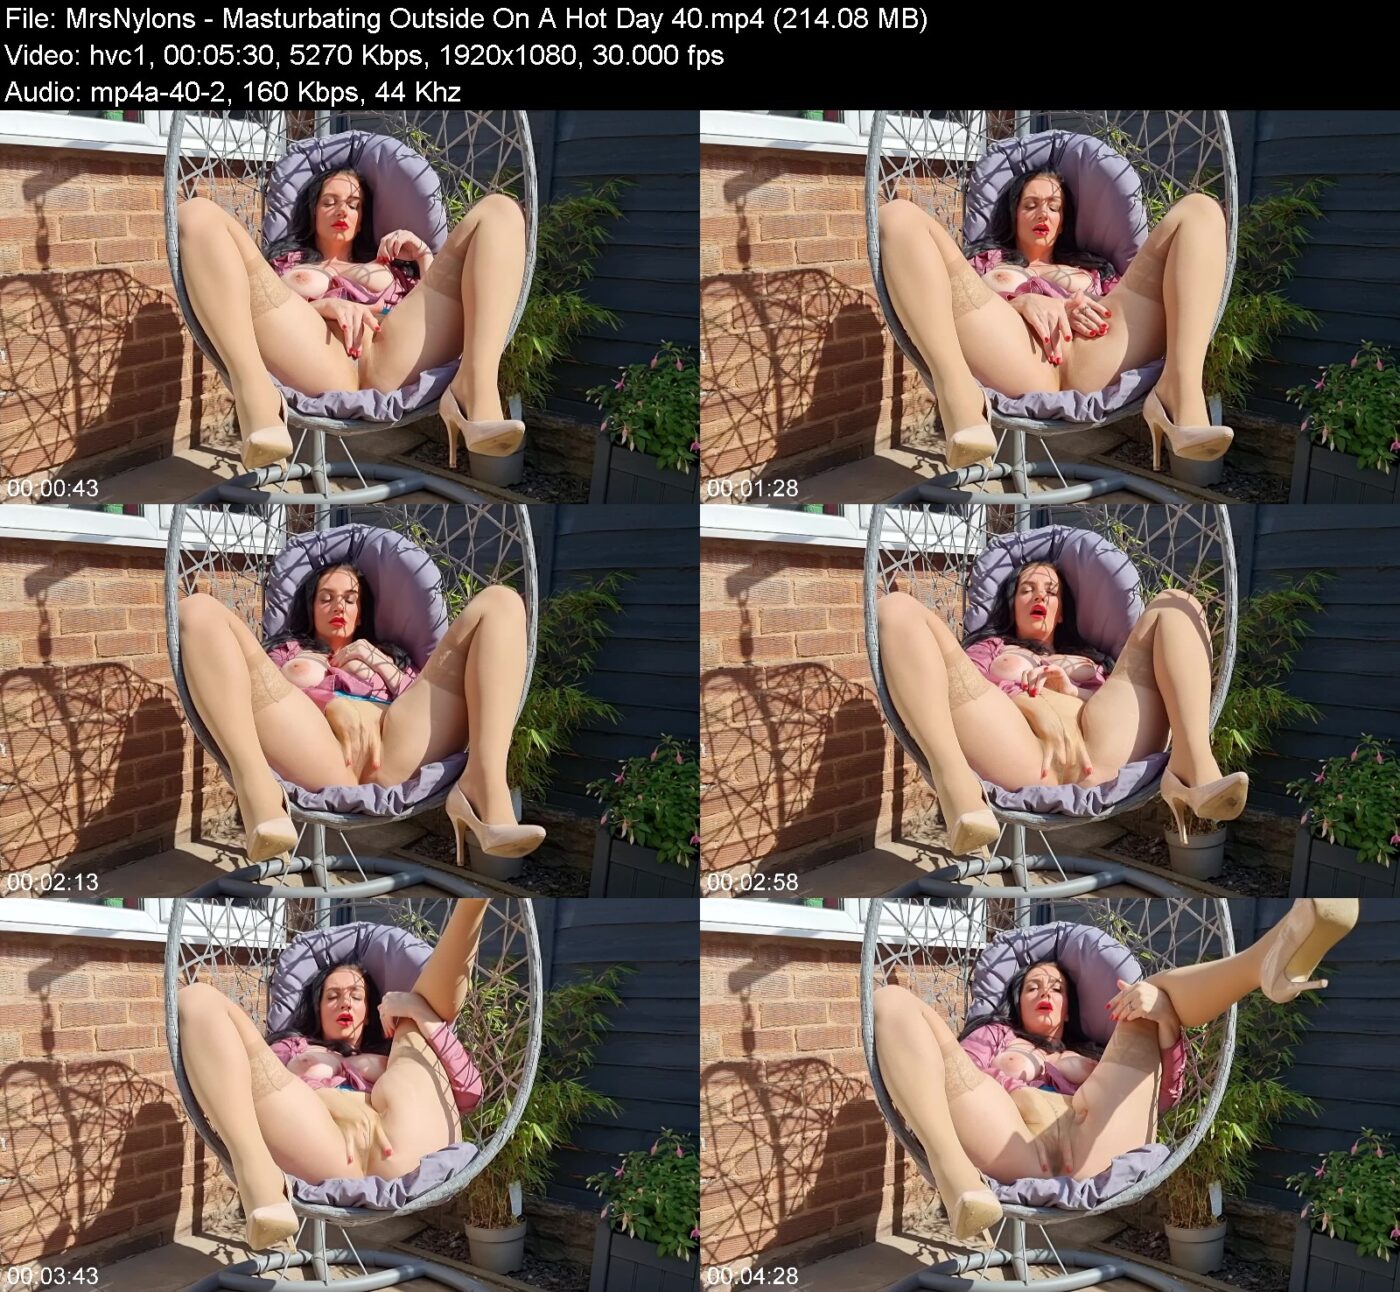 Actress: MrsNylons. Title and Studio: Masturbating Outside On A Hot Day 40